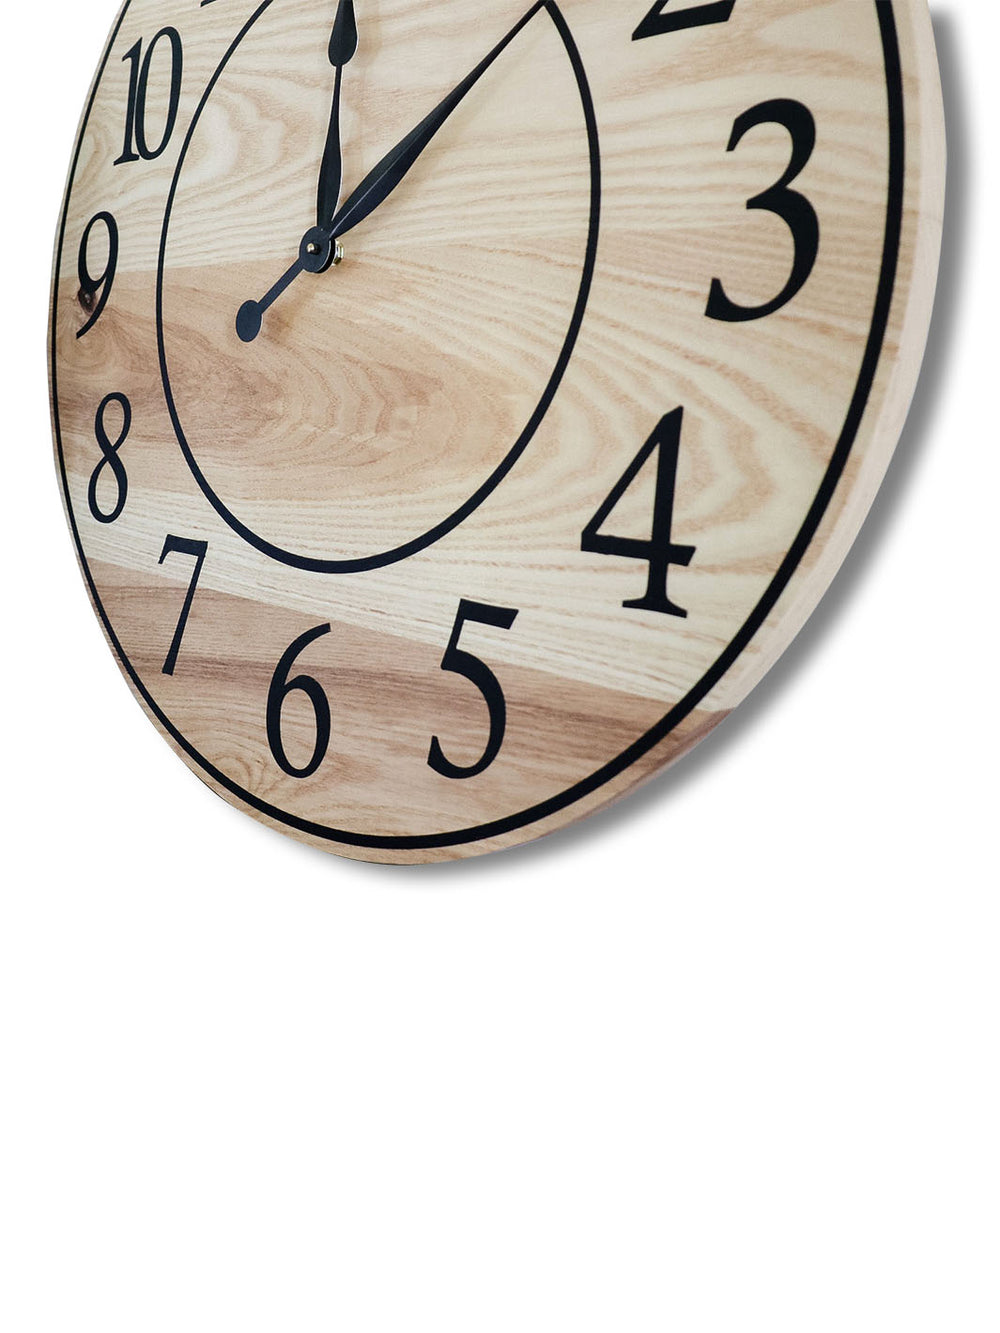 Solid Ash Wood Wall Clock with Black Numbers and Lines Earthly Comfort Clocks 1024-1